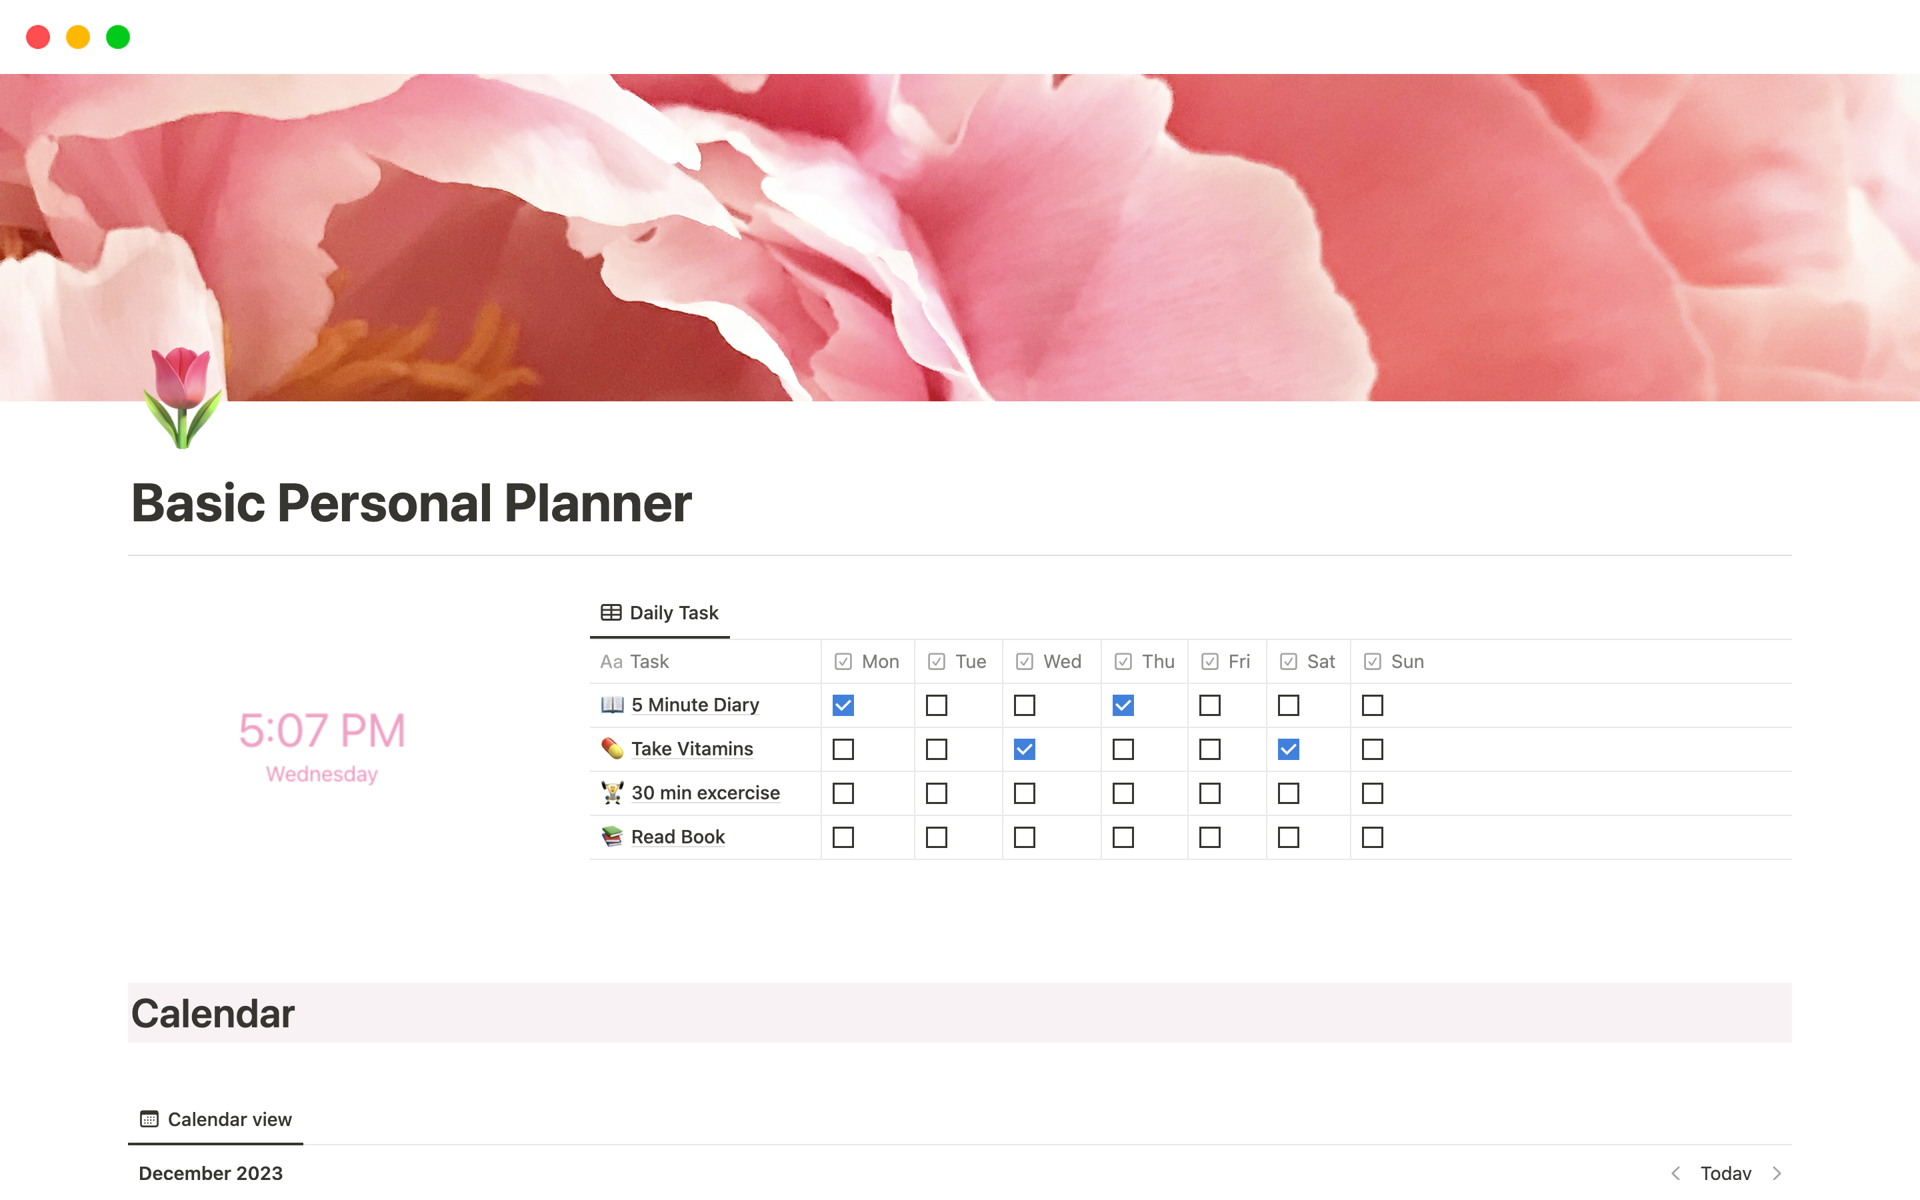 Get daily to monthly tracker and event planning to keep your personal life organize!